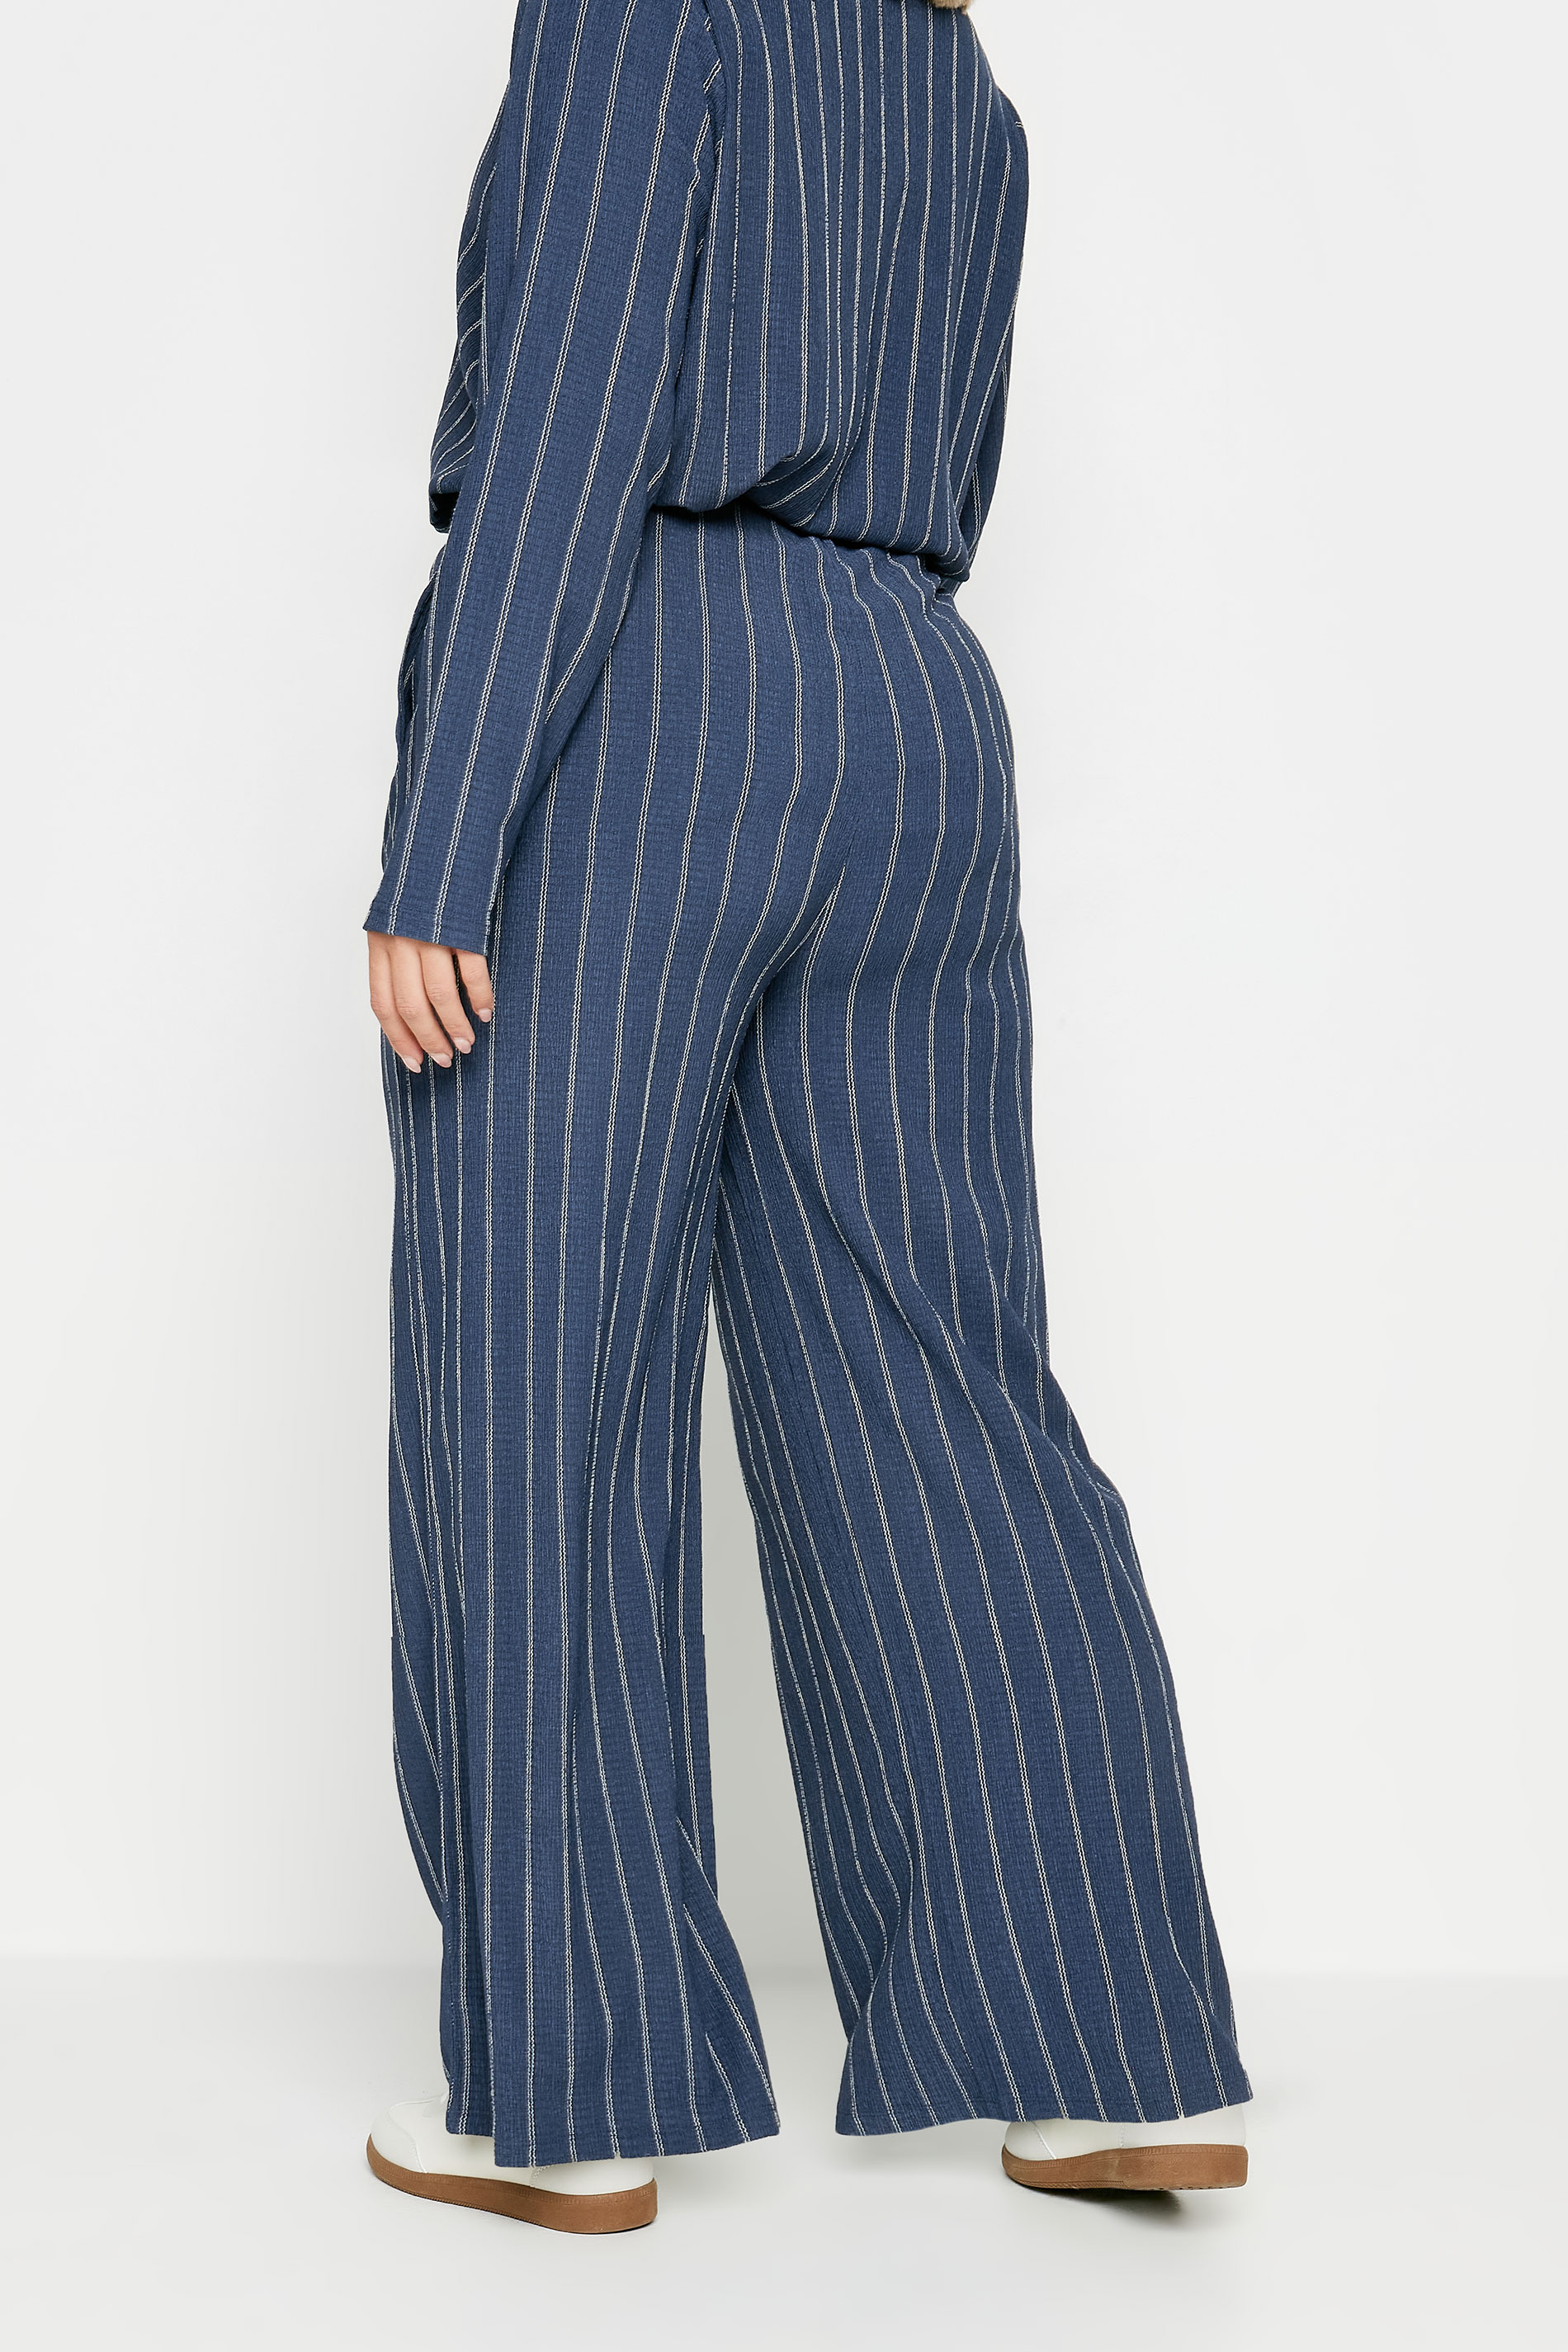 YOURS Plus Size Navy Blue Textured Pinstripe Wide Leg Trousers | Yours Clothing 3